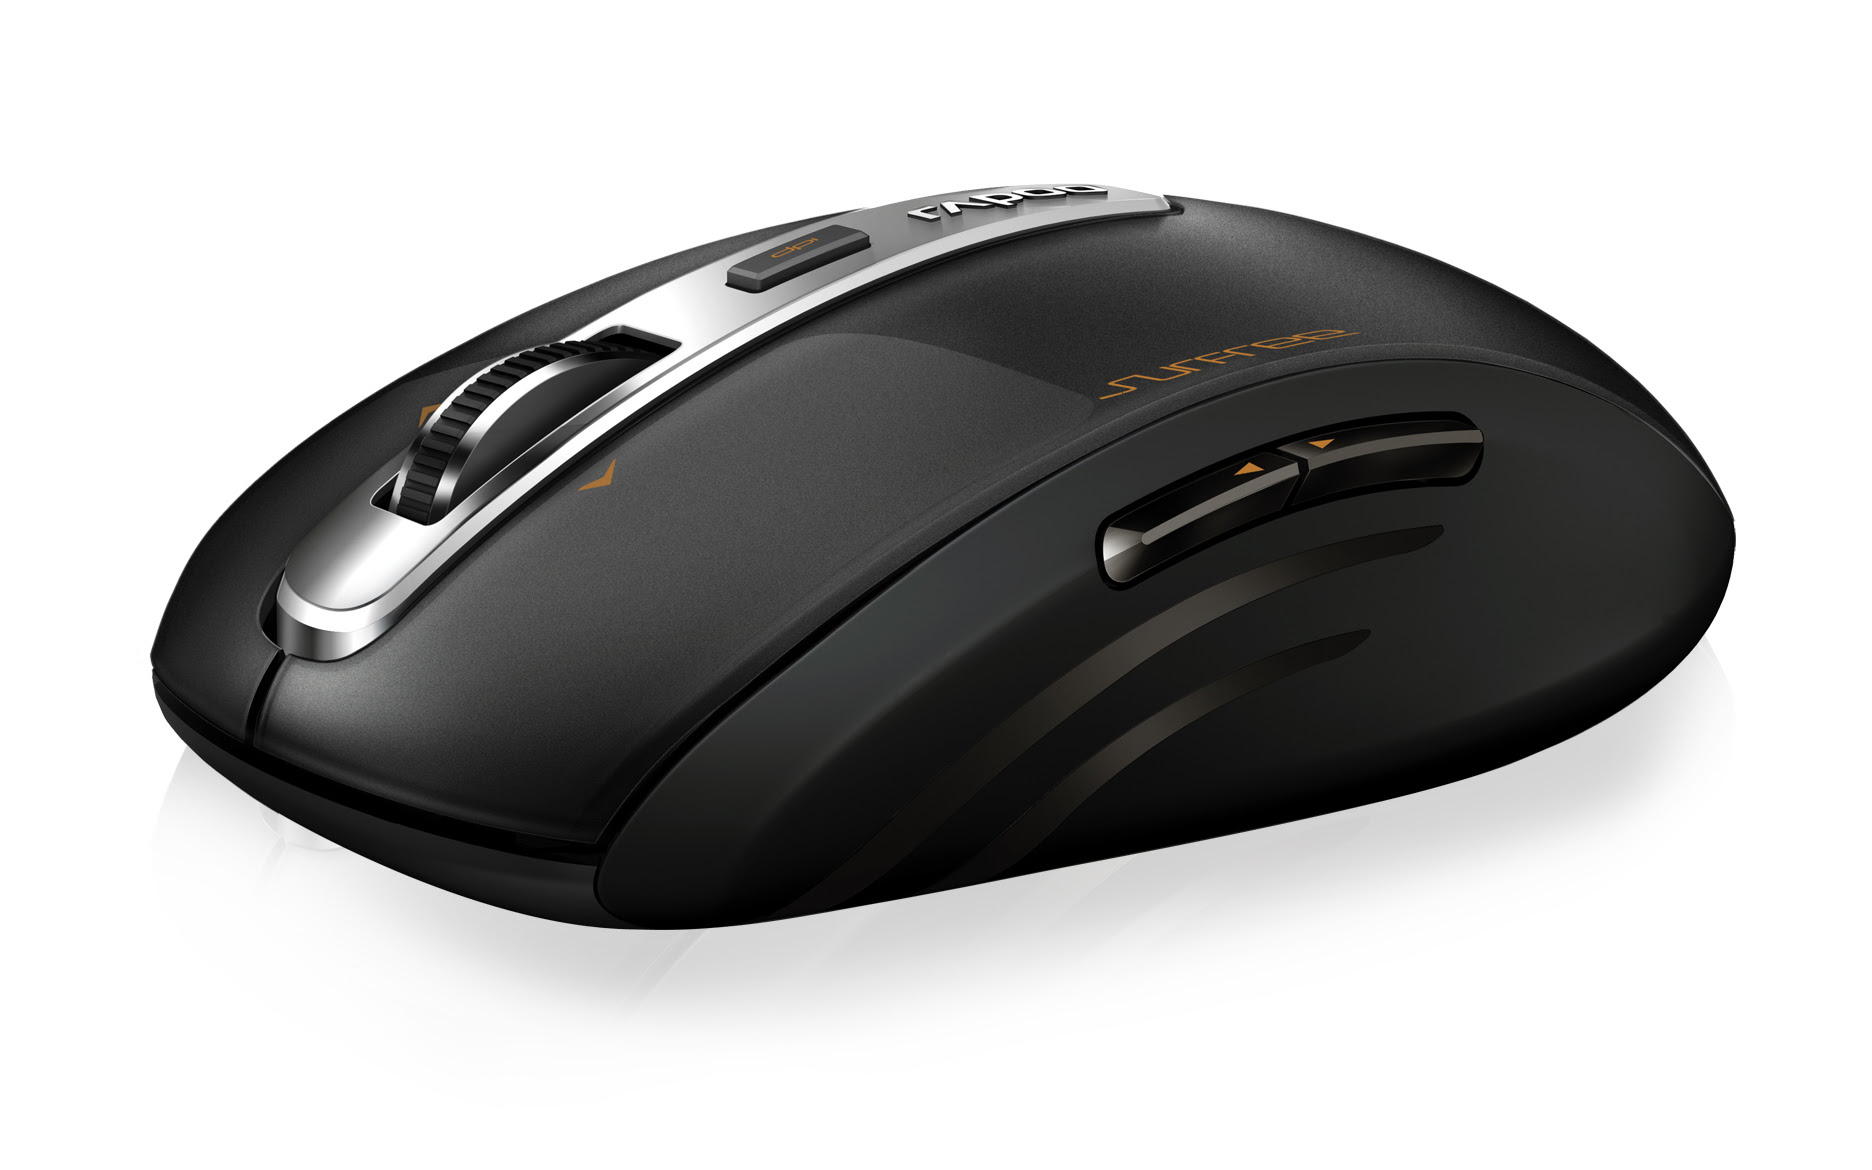 Rapoo’s Compact 3920P Wireless Laser Mouse Provides a Smooth Navigating Experience